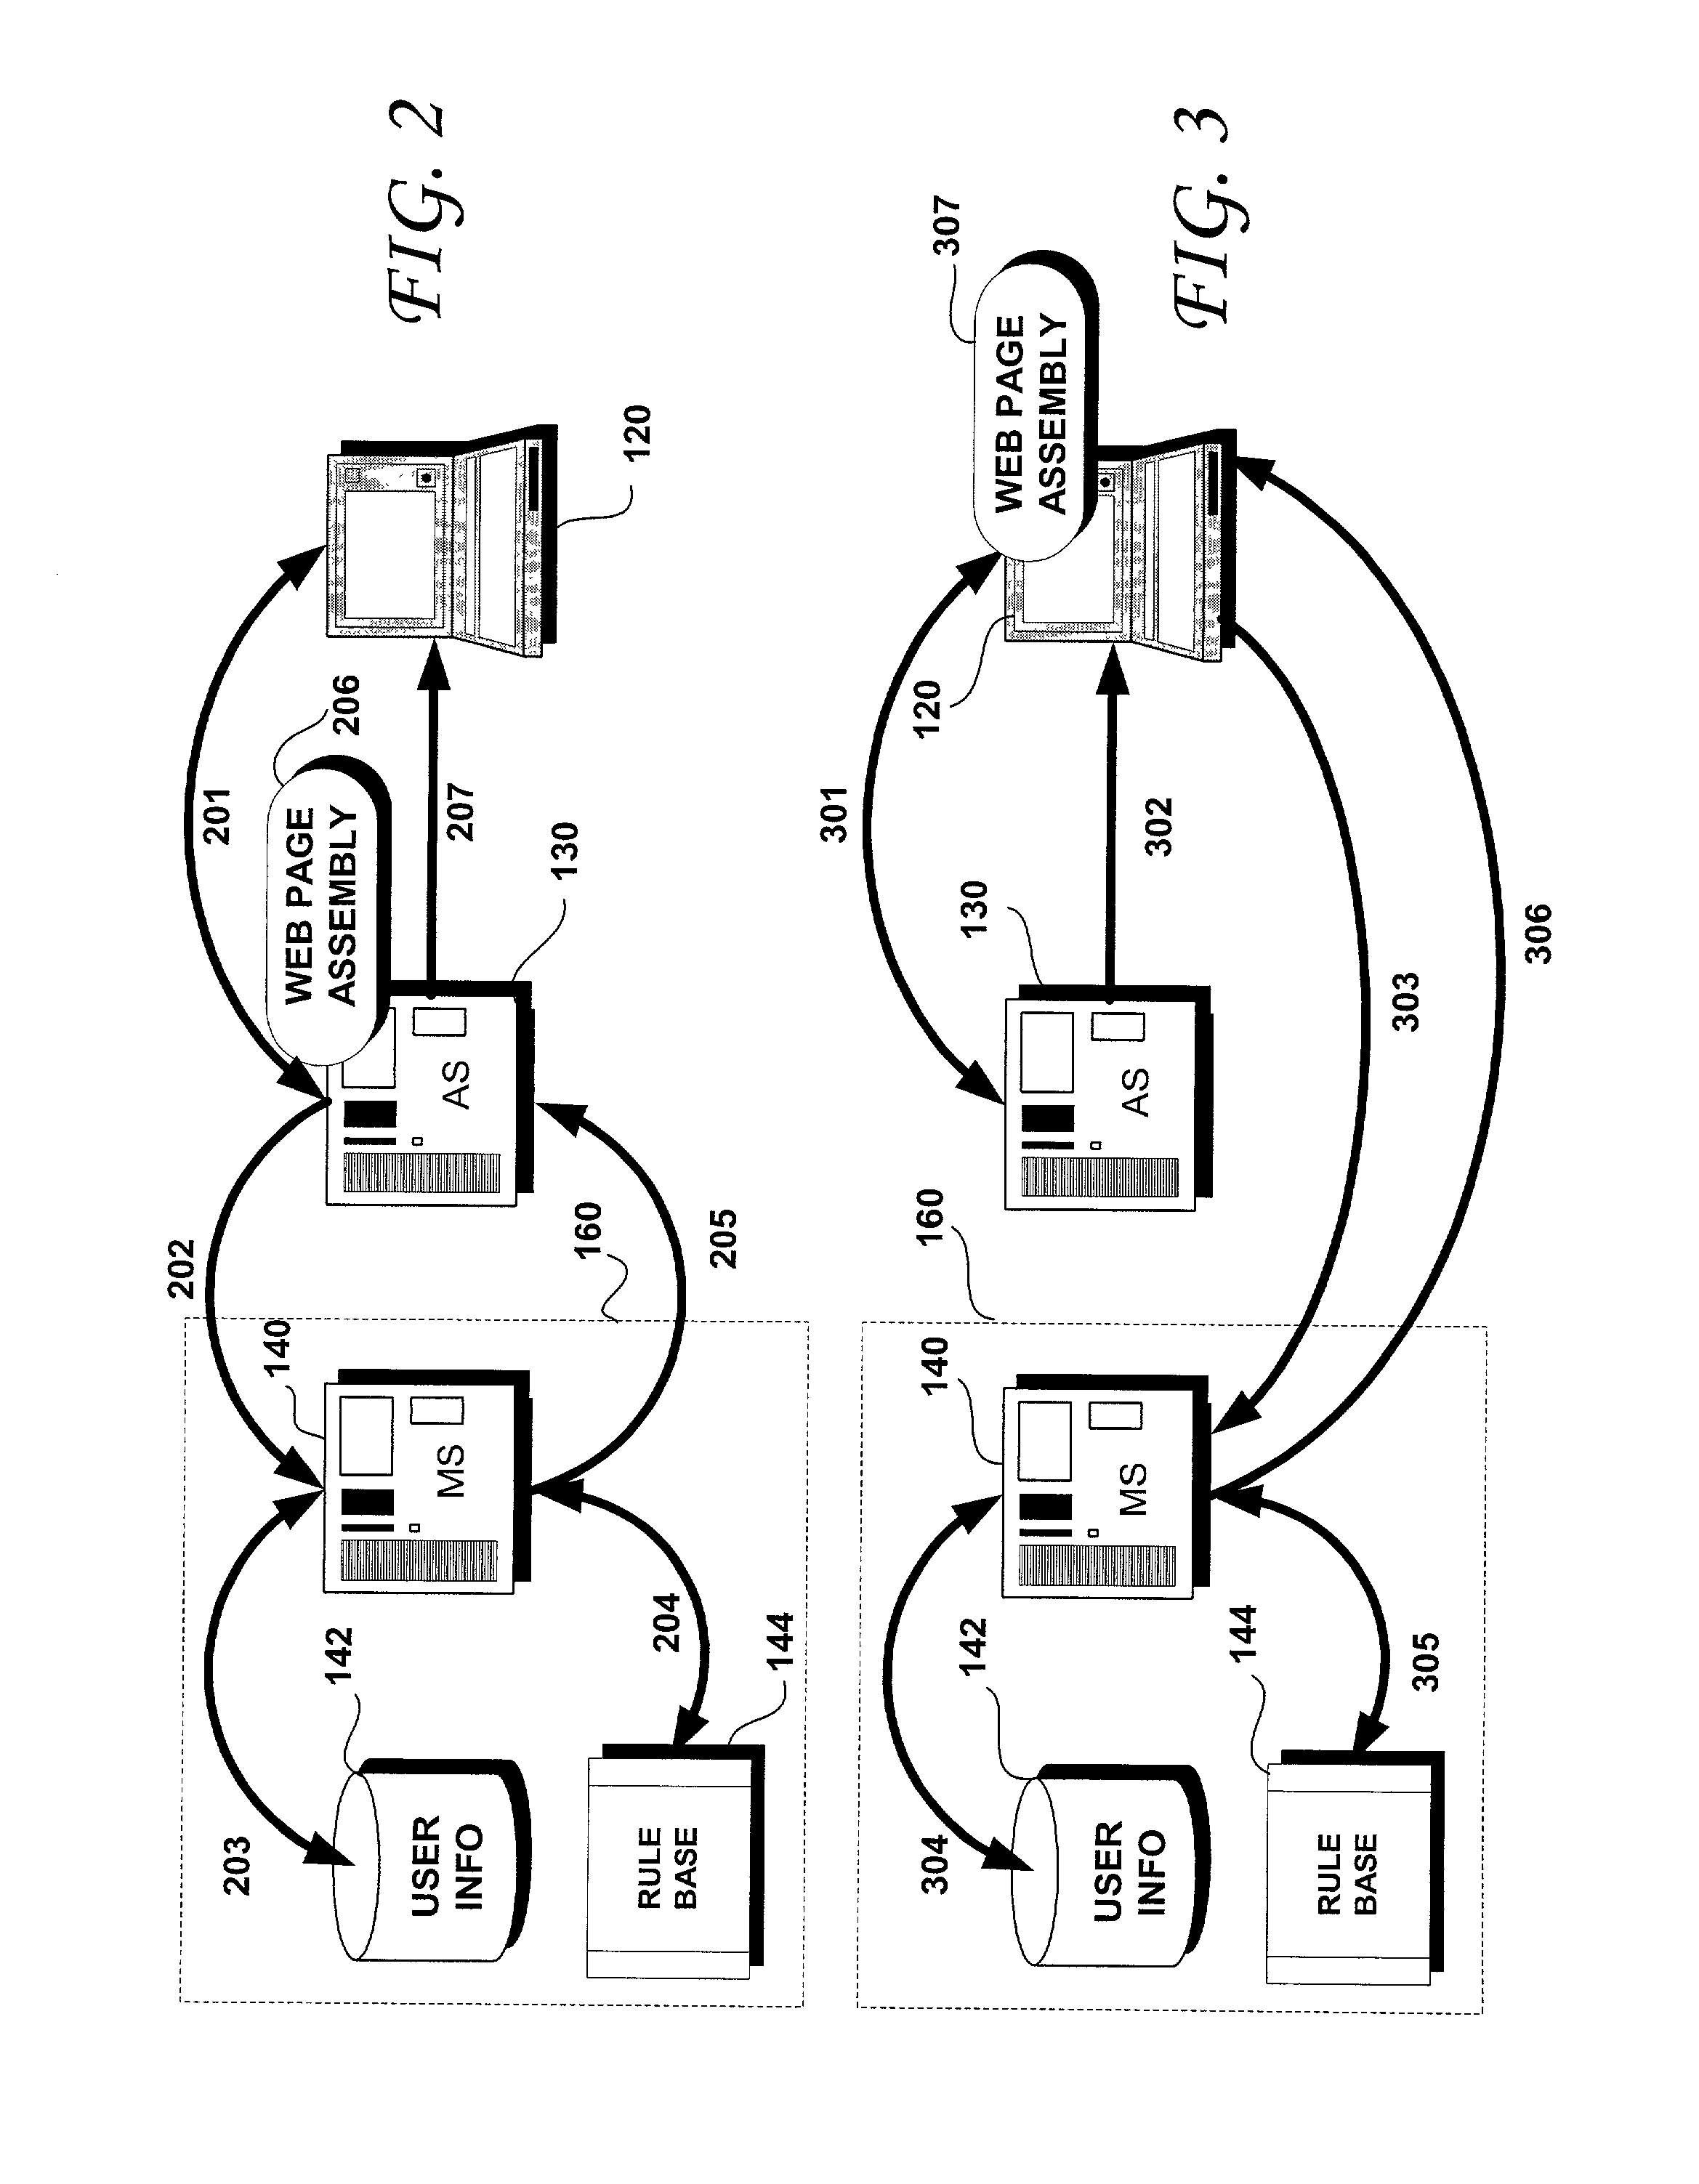 Methods and systems for rule-based distributed and personalized content delivery